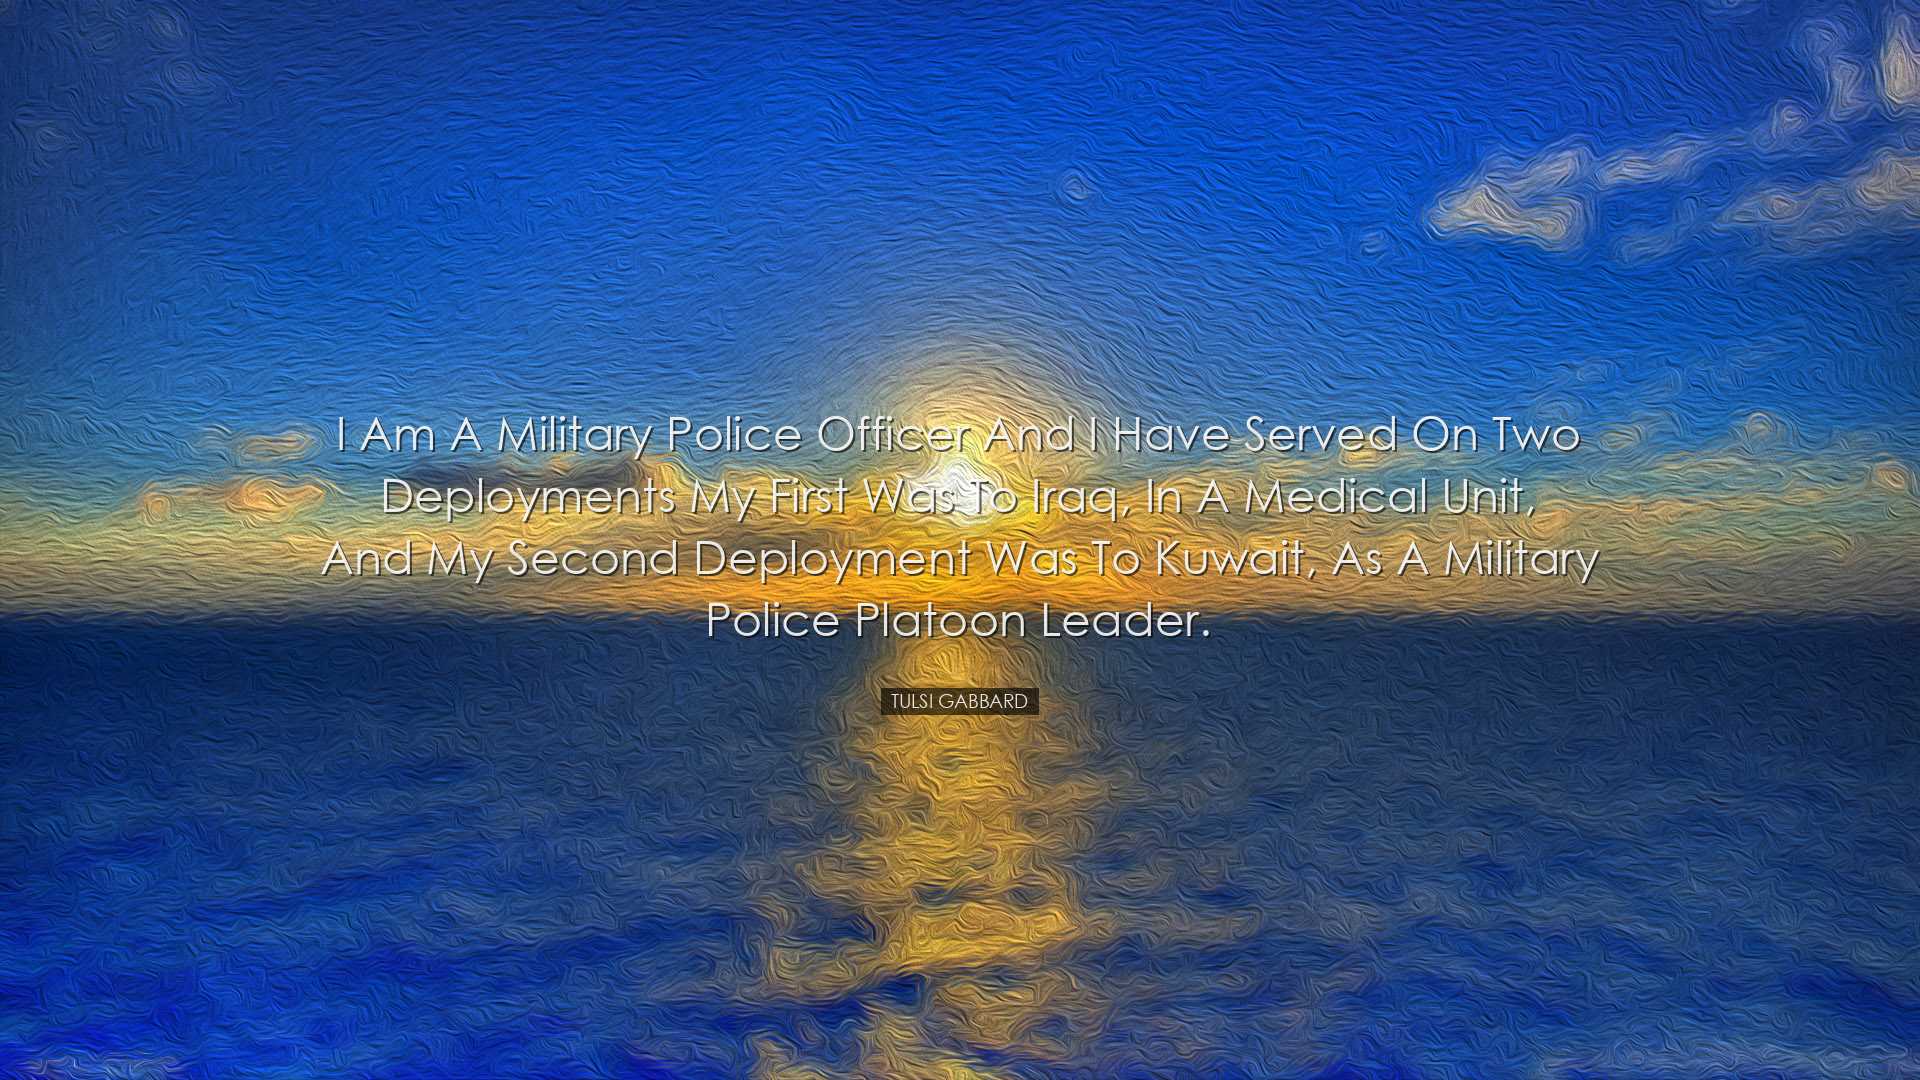 I am a military police officer and I have served on two deployment